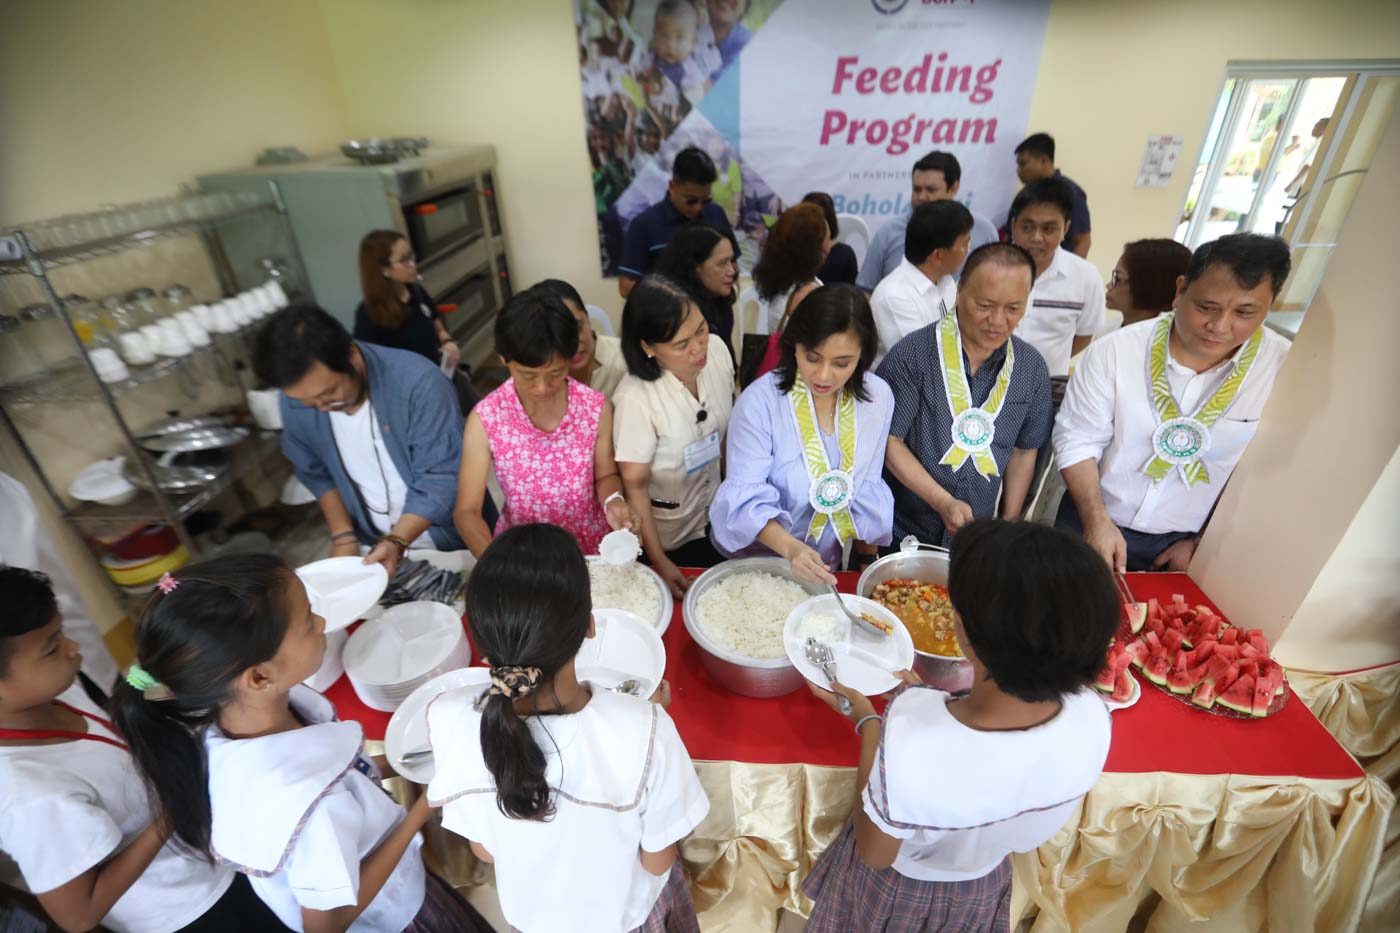 LIVELIHOOD ASSISTANCE. Vice President Leni Robredo in August 2018 turns over kitchen tools and equipment to Lourdes National High School in Panglao, Bohol, for its feeding program and vocational course. The assistance is under the OVP’s Angat Buhay program. 